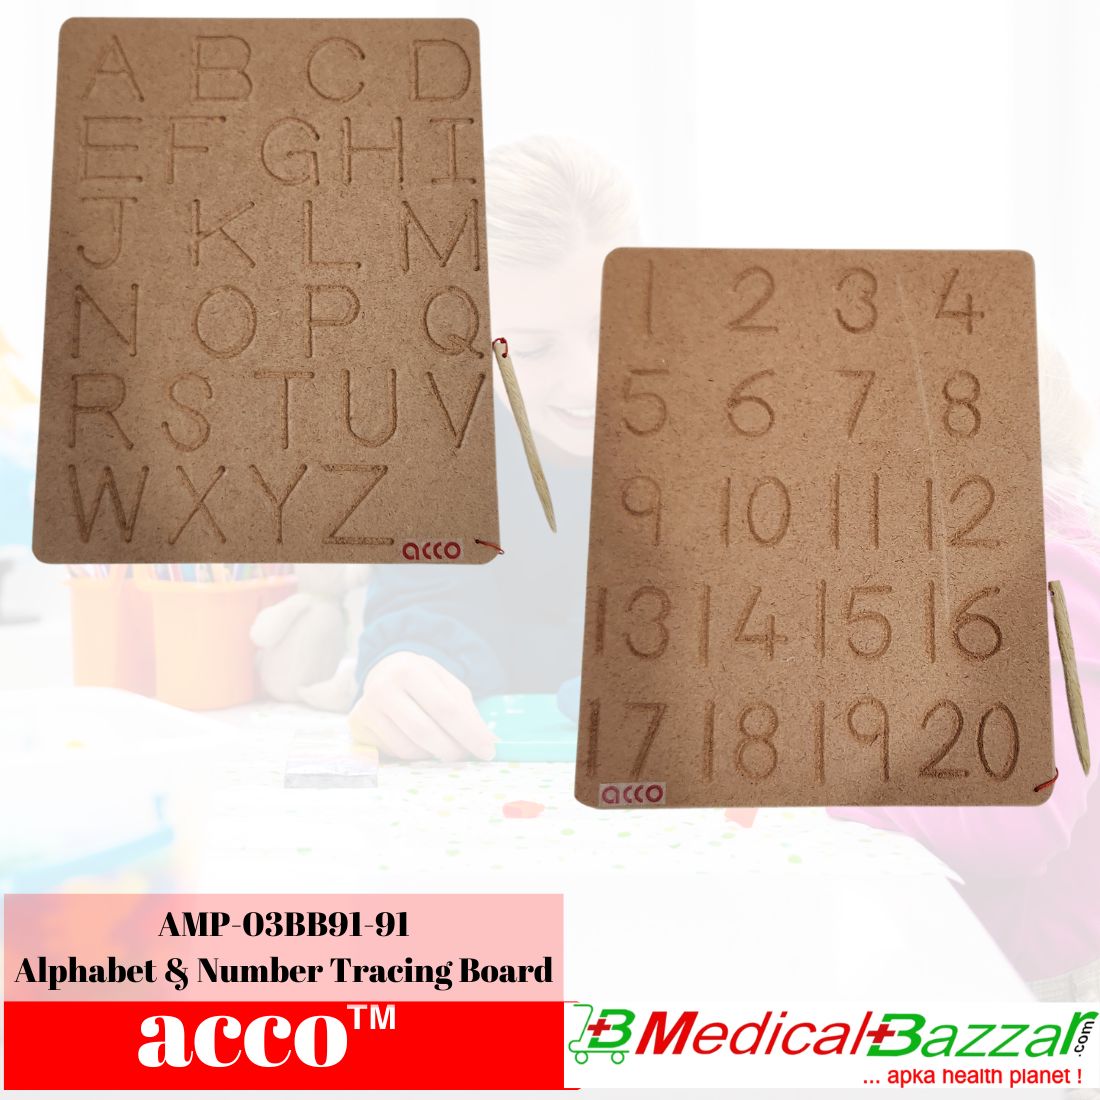 acco Tracing Wooden Board For Kids